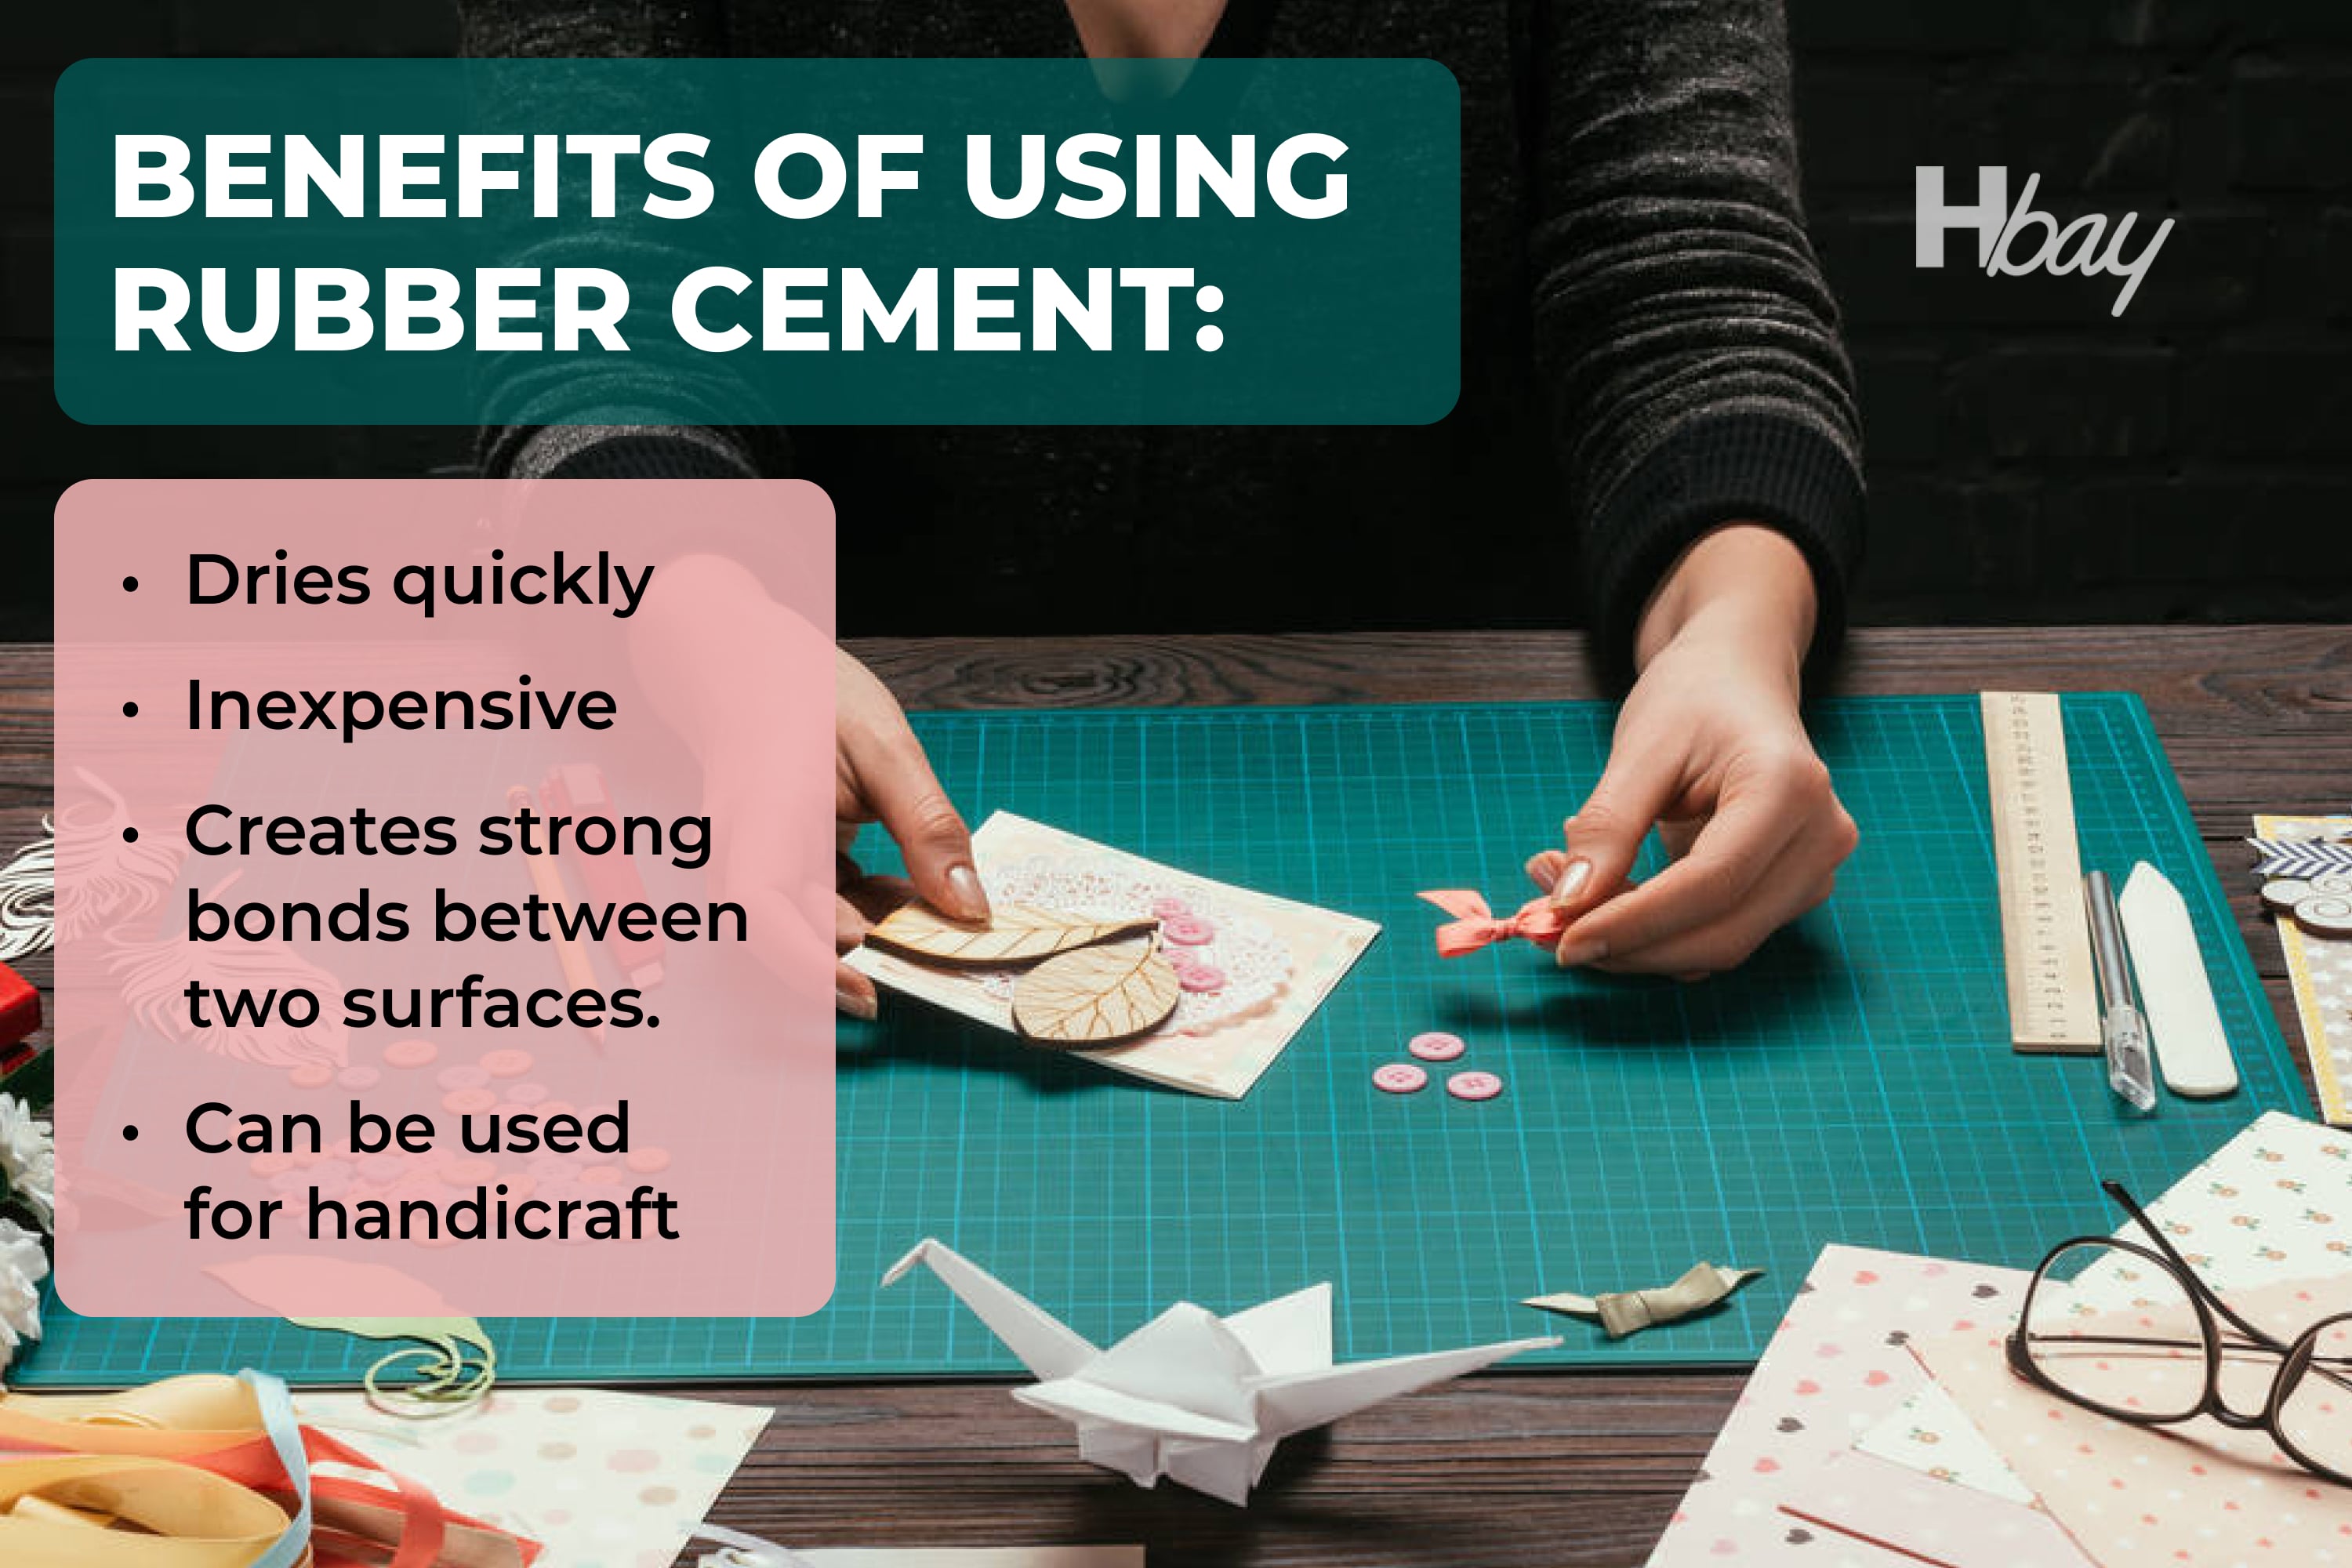 Benefits of using rubber cement